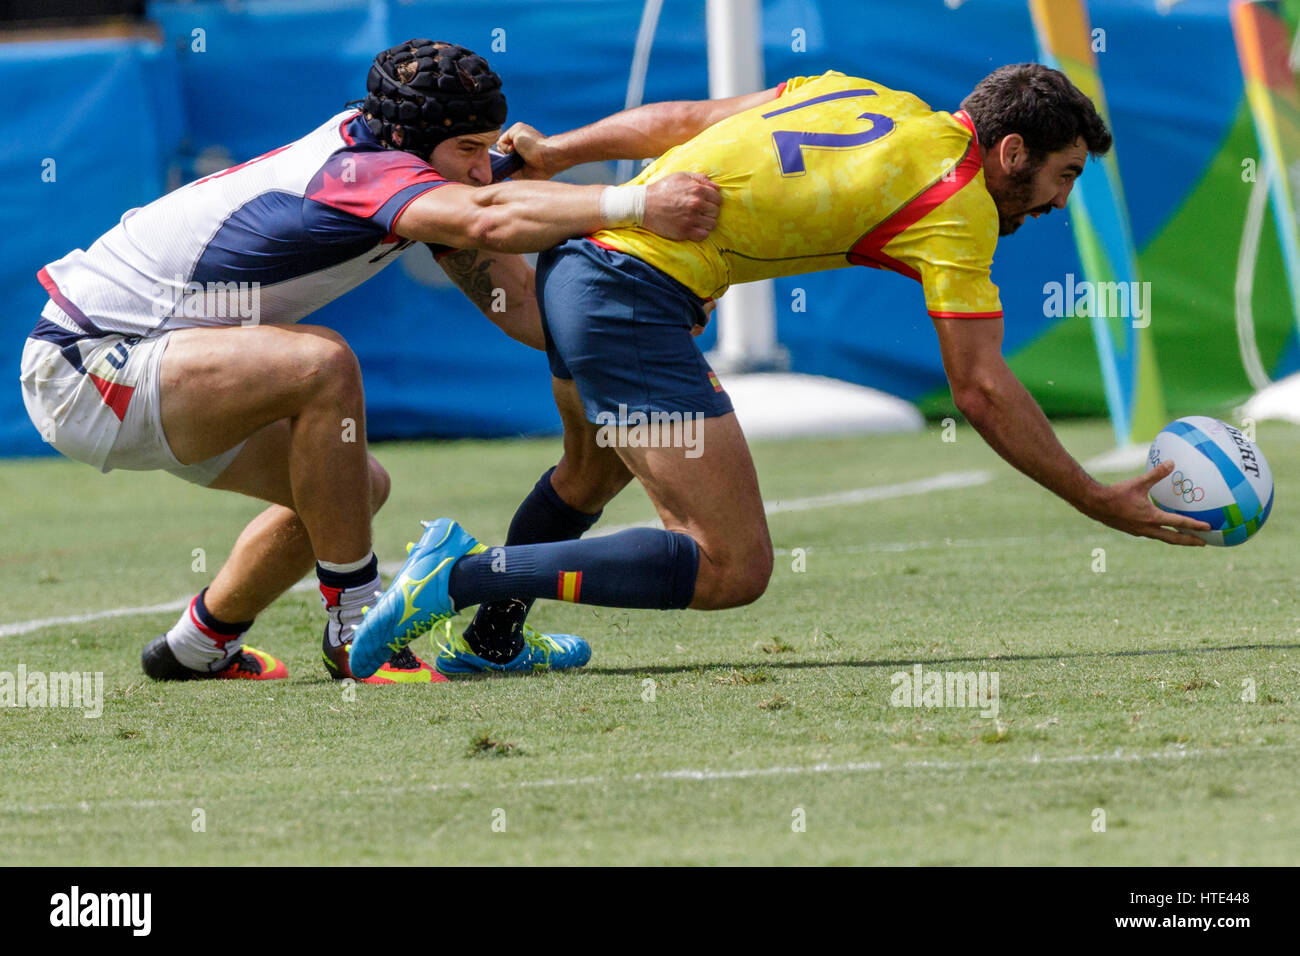 Rio de Janeiro, Brazil. 11 August 2016 Javier Carrion  (ESP) and Garrett Bender (USA) competes in the Men's  Rugby Sevens in a match vs. USA at the 20 Stock Photo